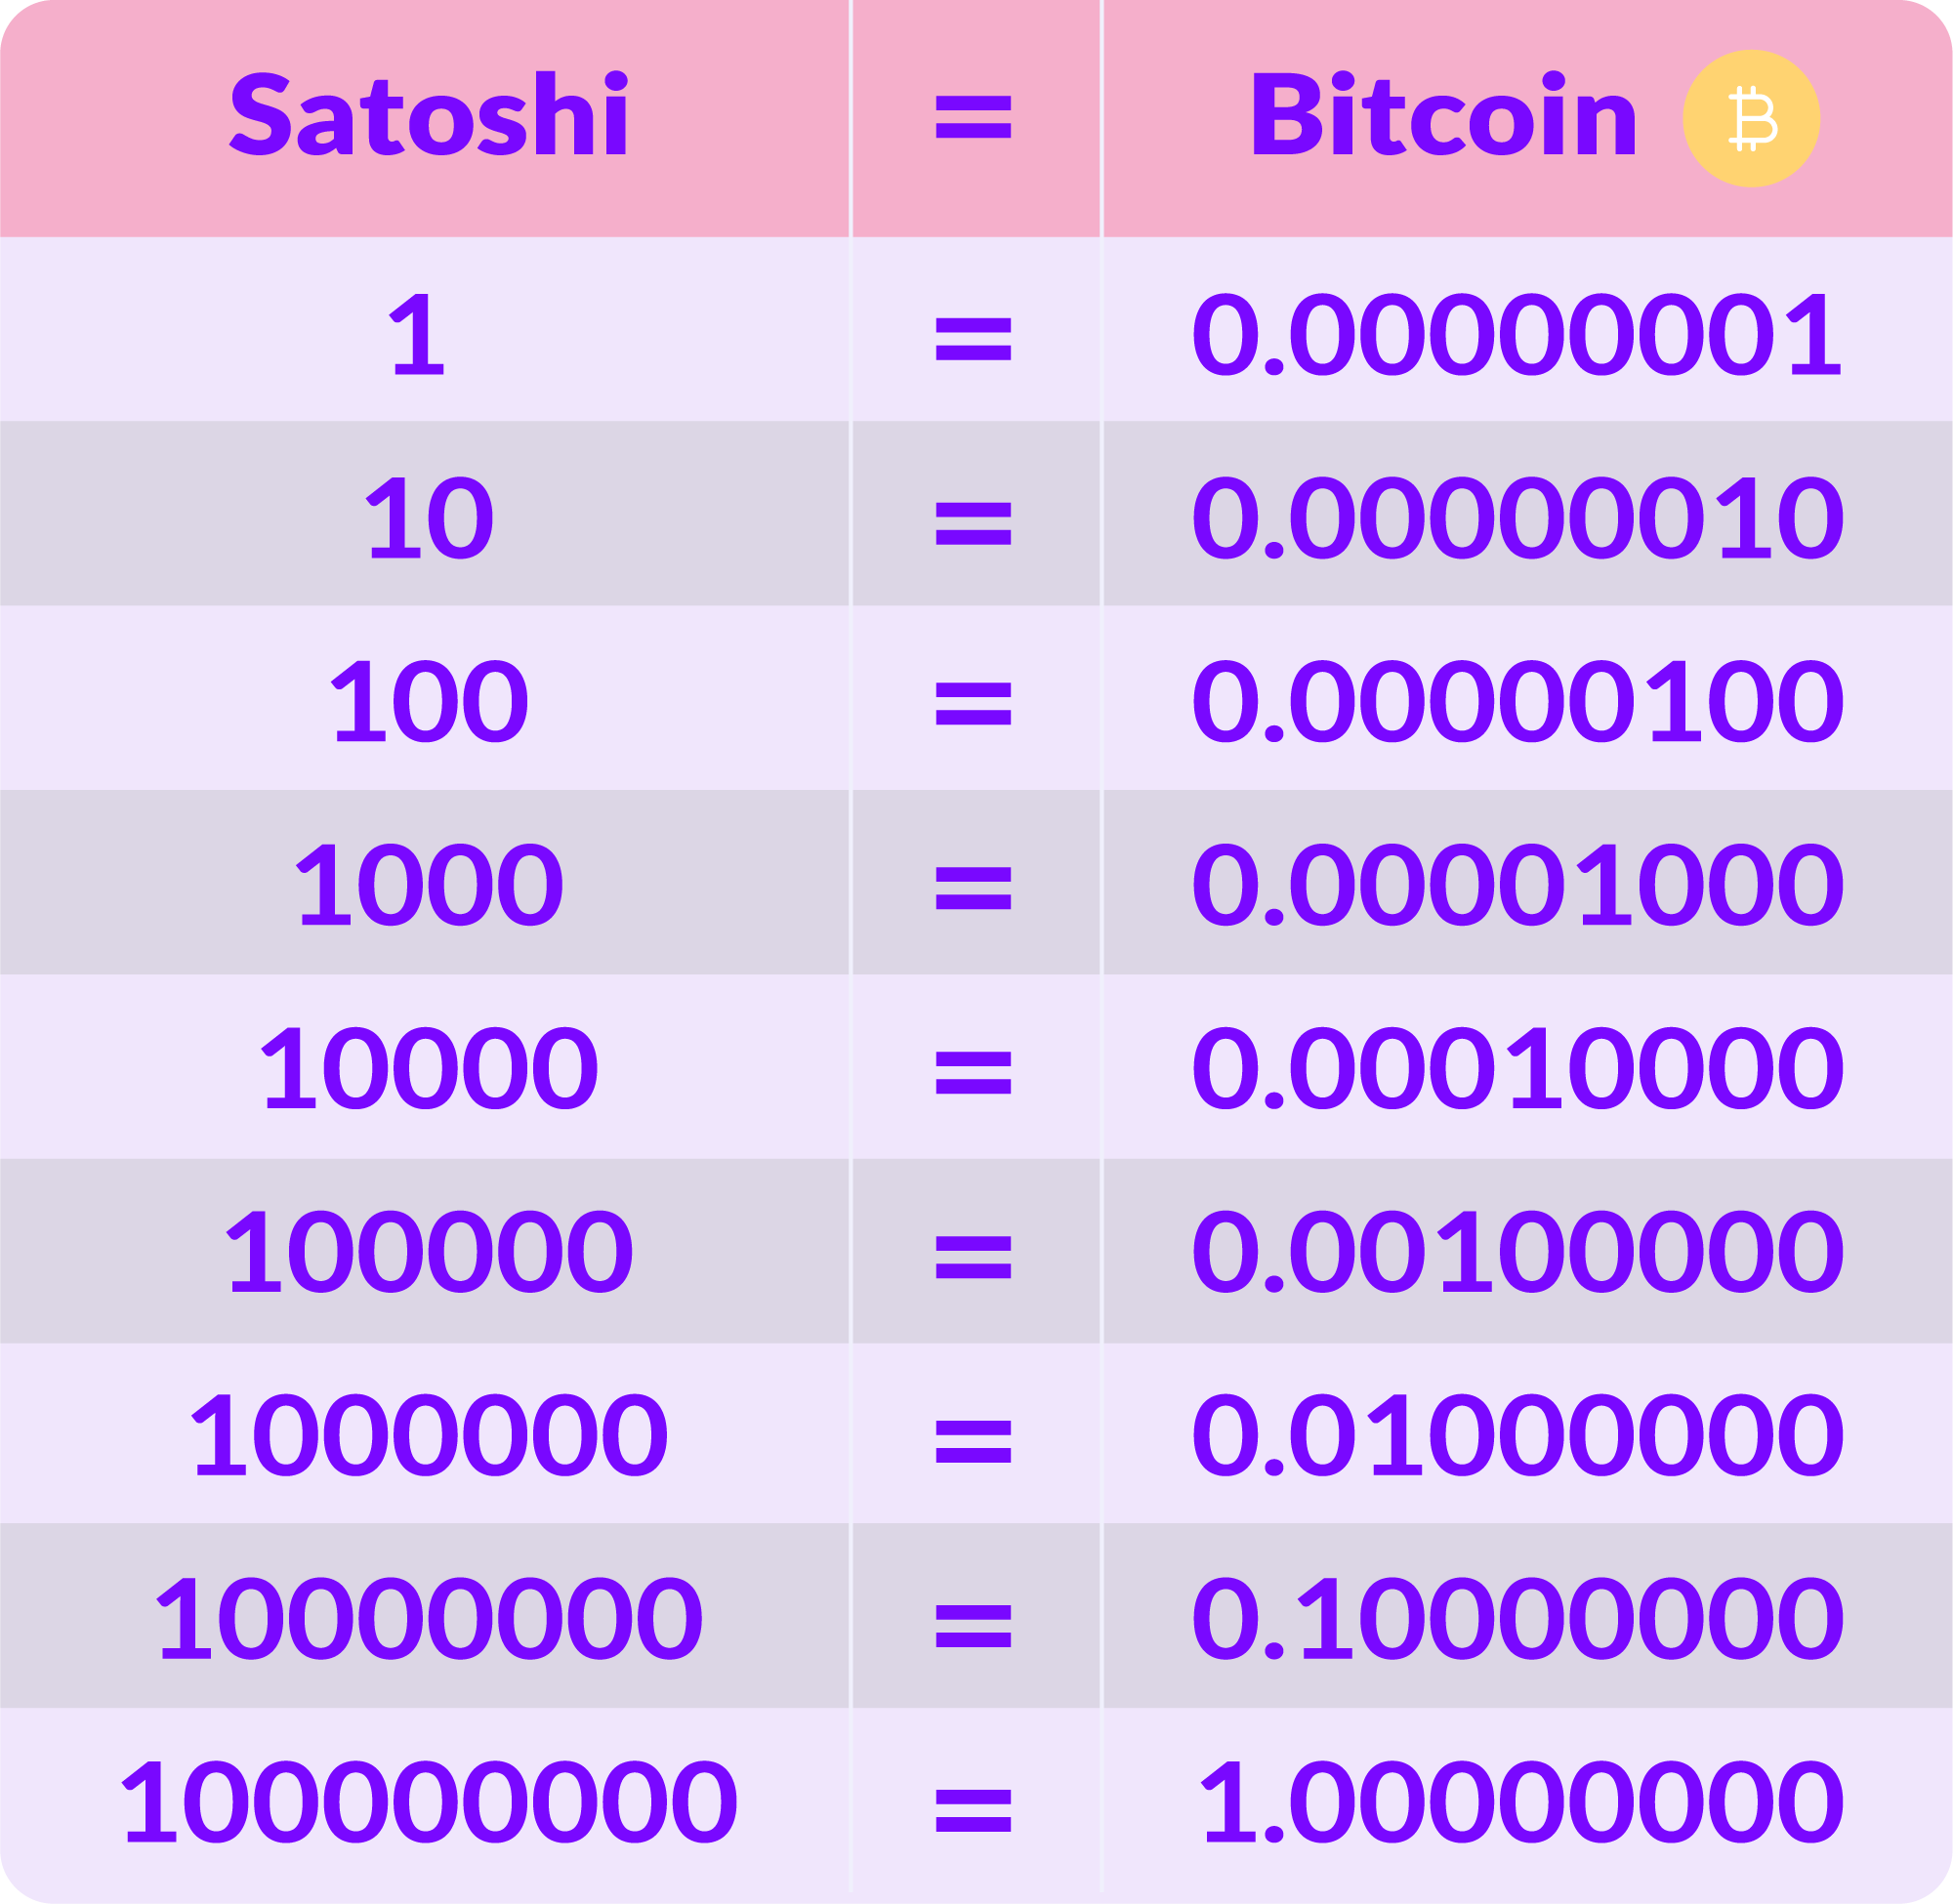 Satoshi in Bitcoin Explained: What It Is and How Much It Is Worth